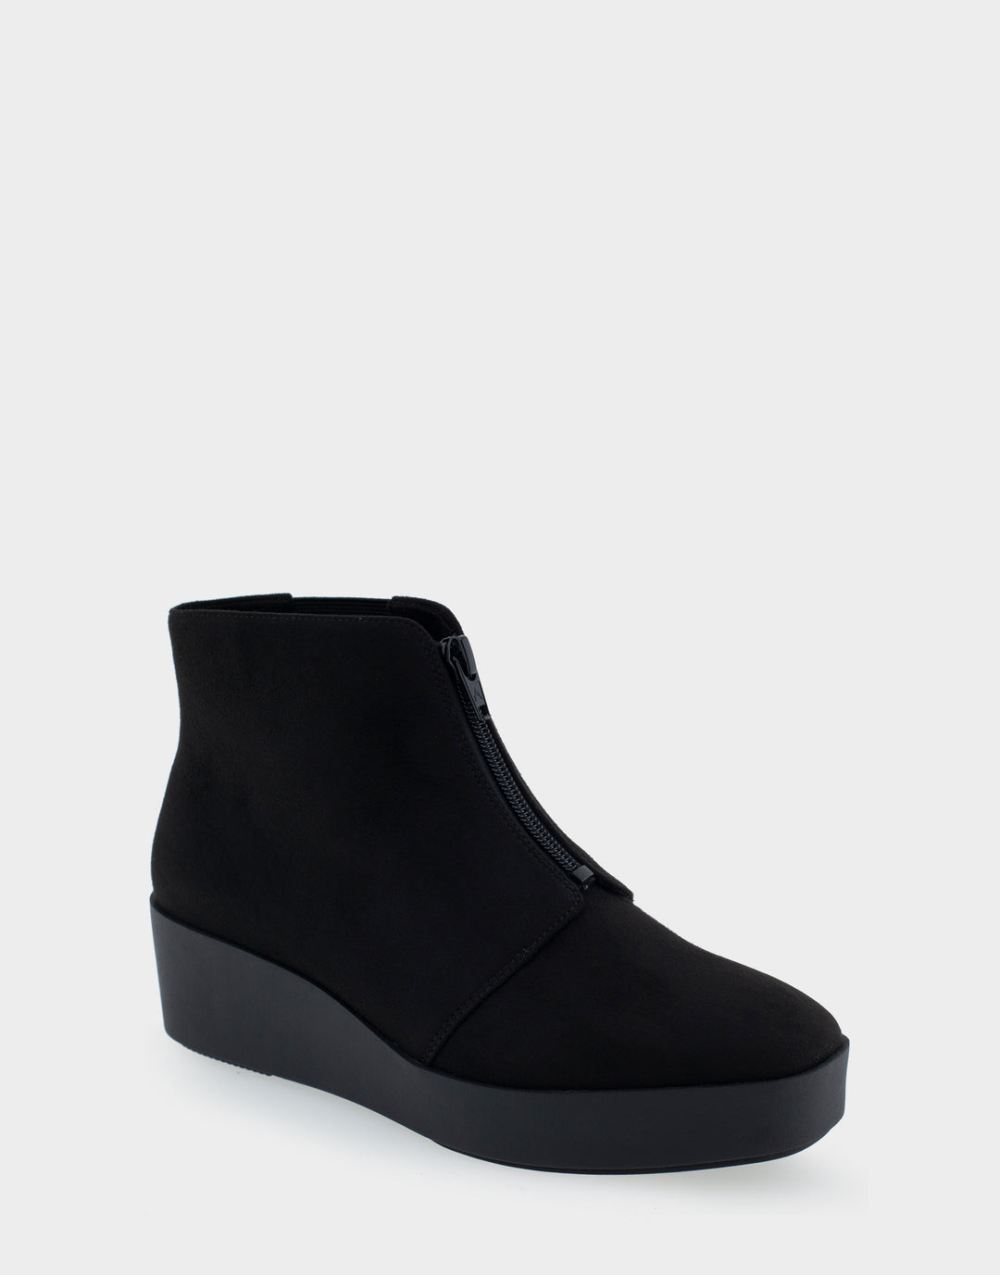 Women's | Carin Black Faux Suede Wedge Heel Ankle Boot